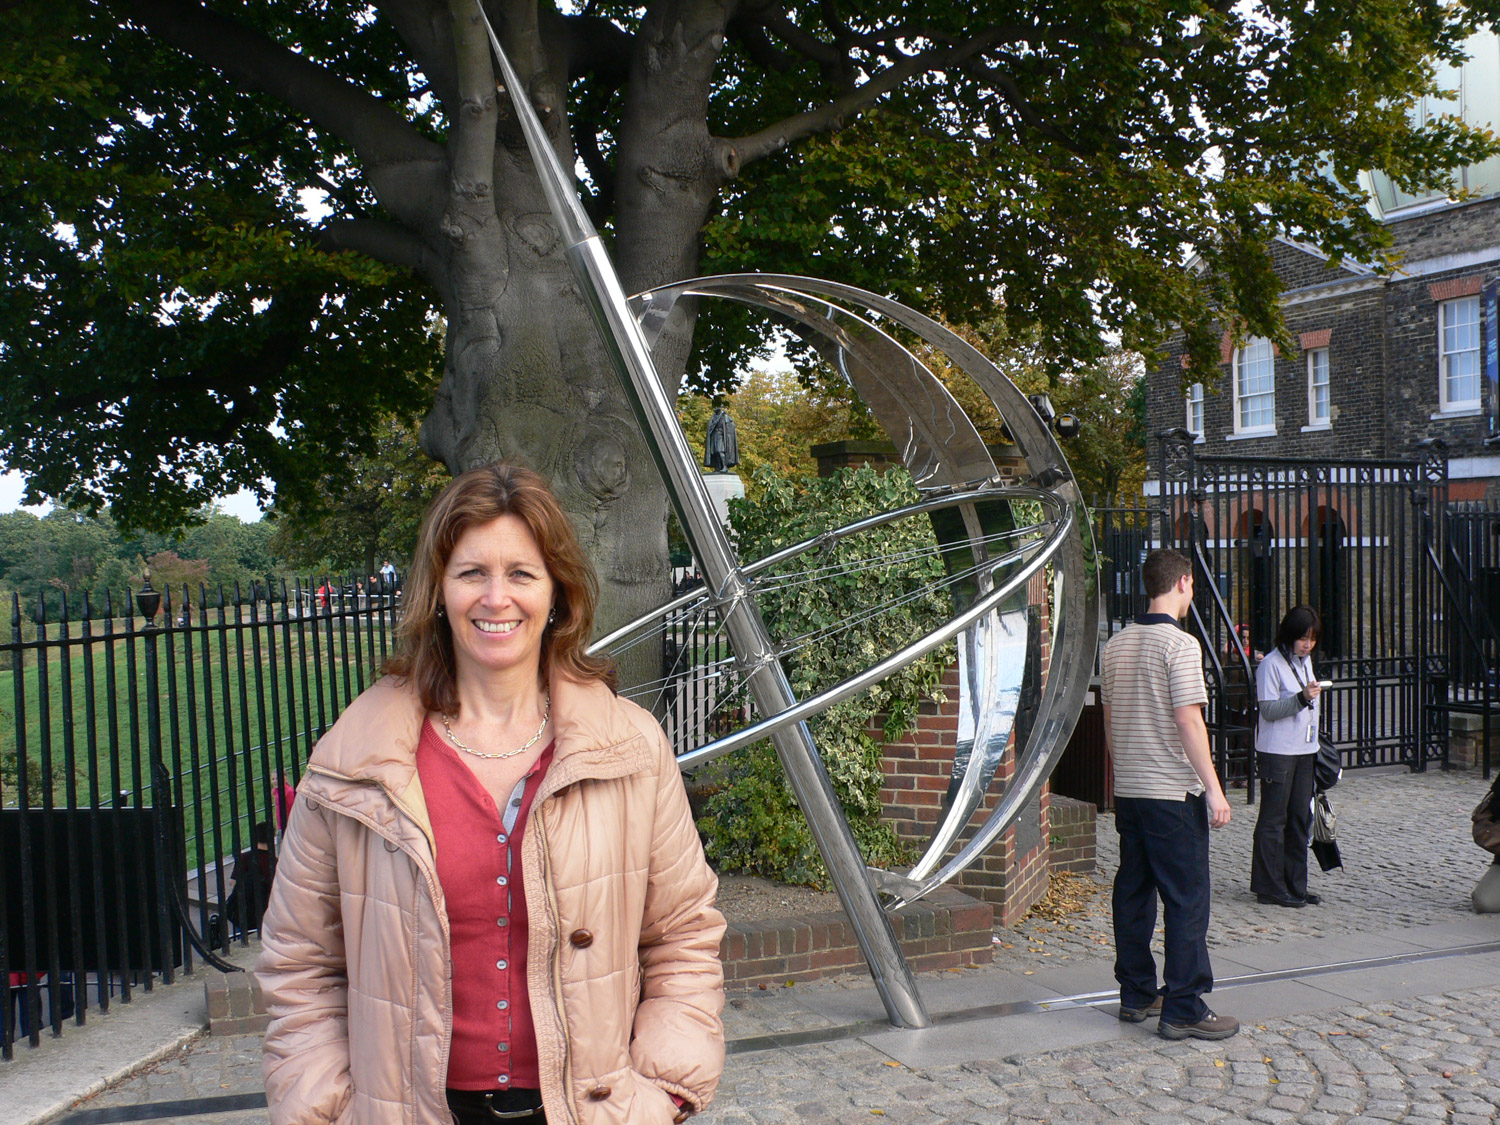 At the Greenwich Meridian